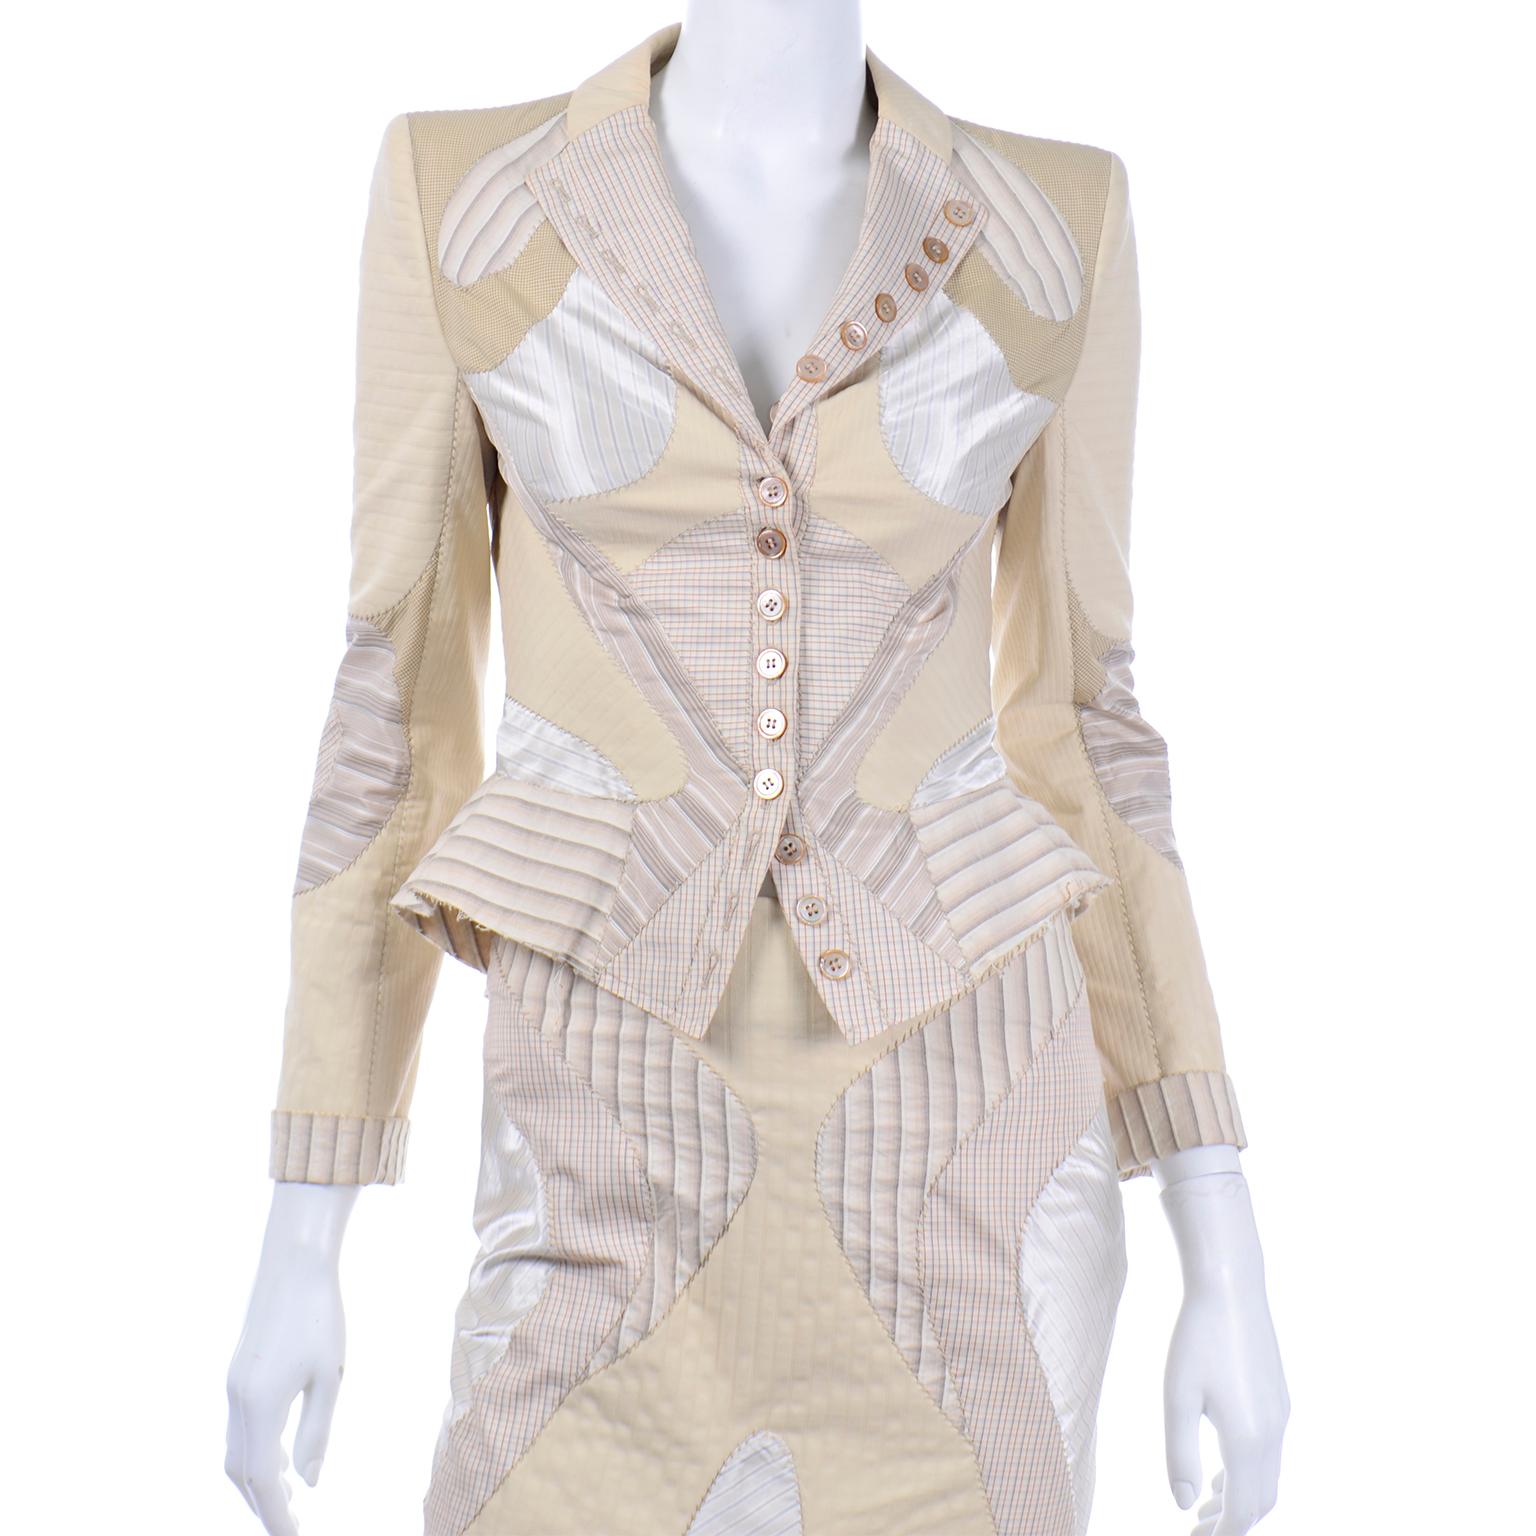 Alexander McQueen Spring 2004 Deliverance Patchwork 2pc Skirt & Jacket Outfit  2